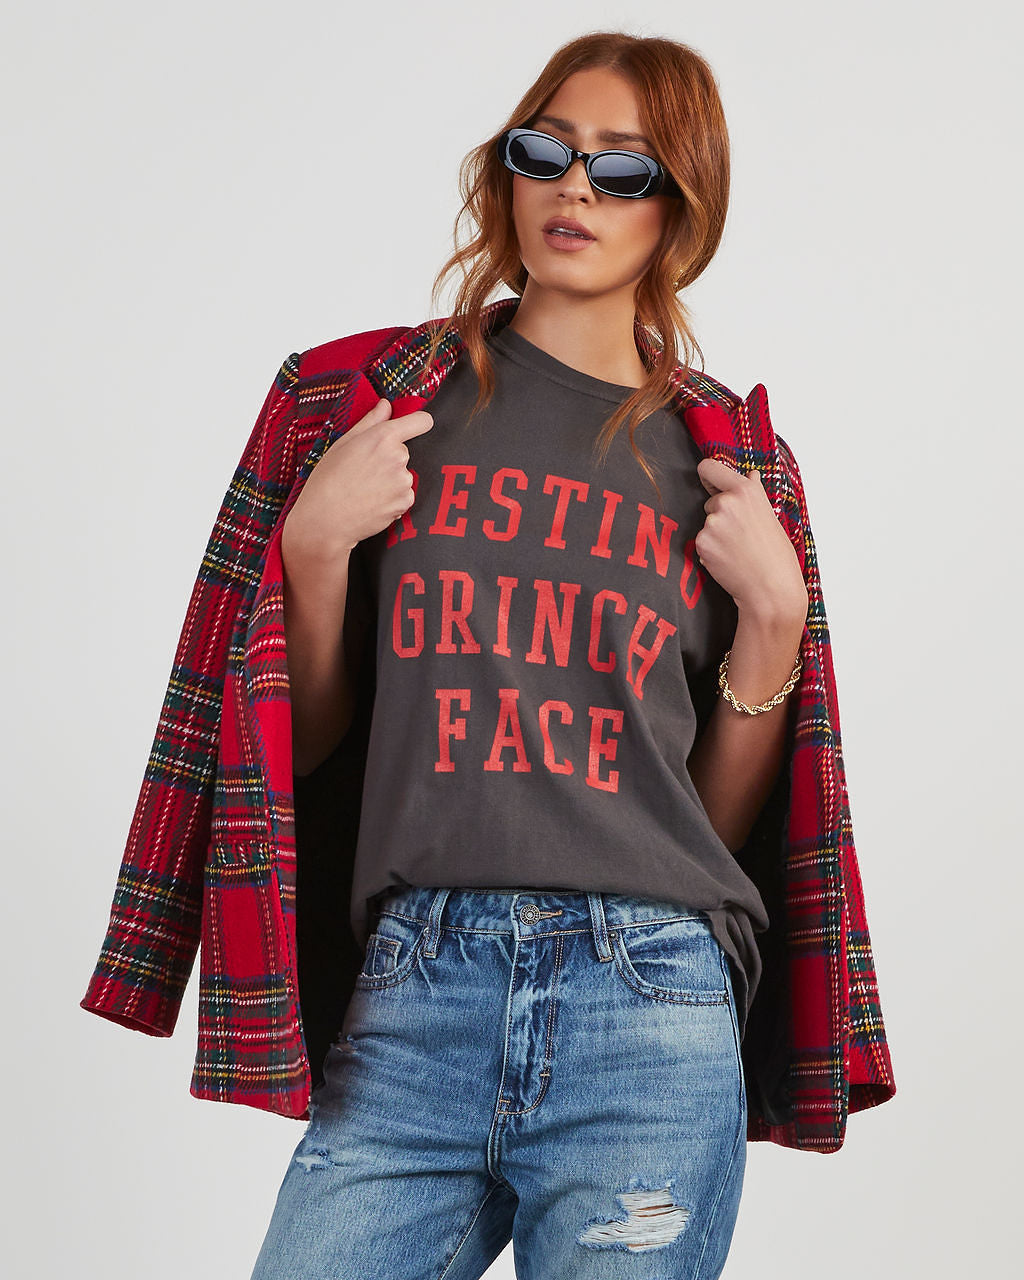 

Resting Grinch Face Cotton Tee